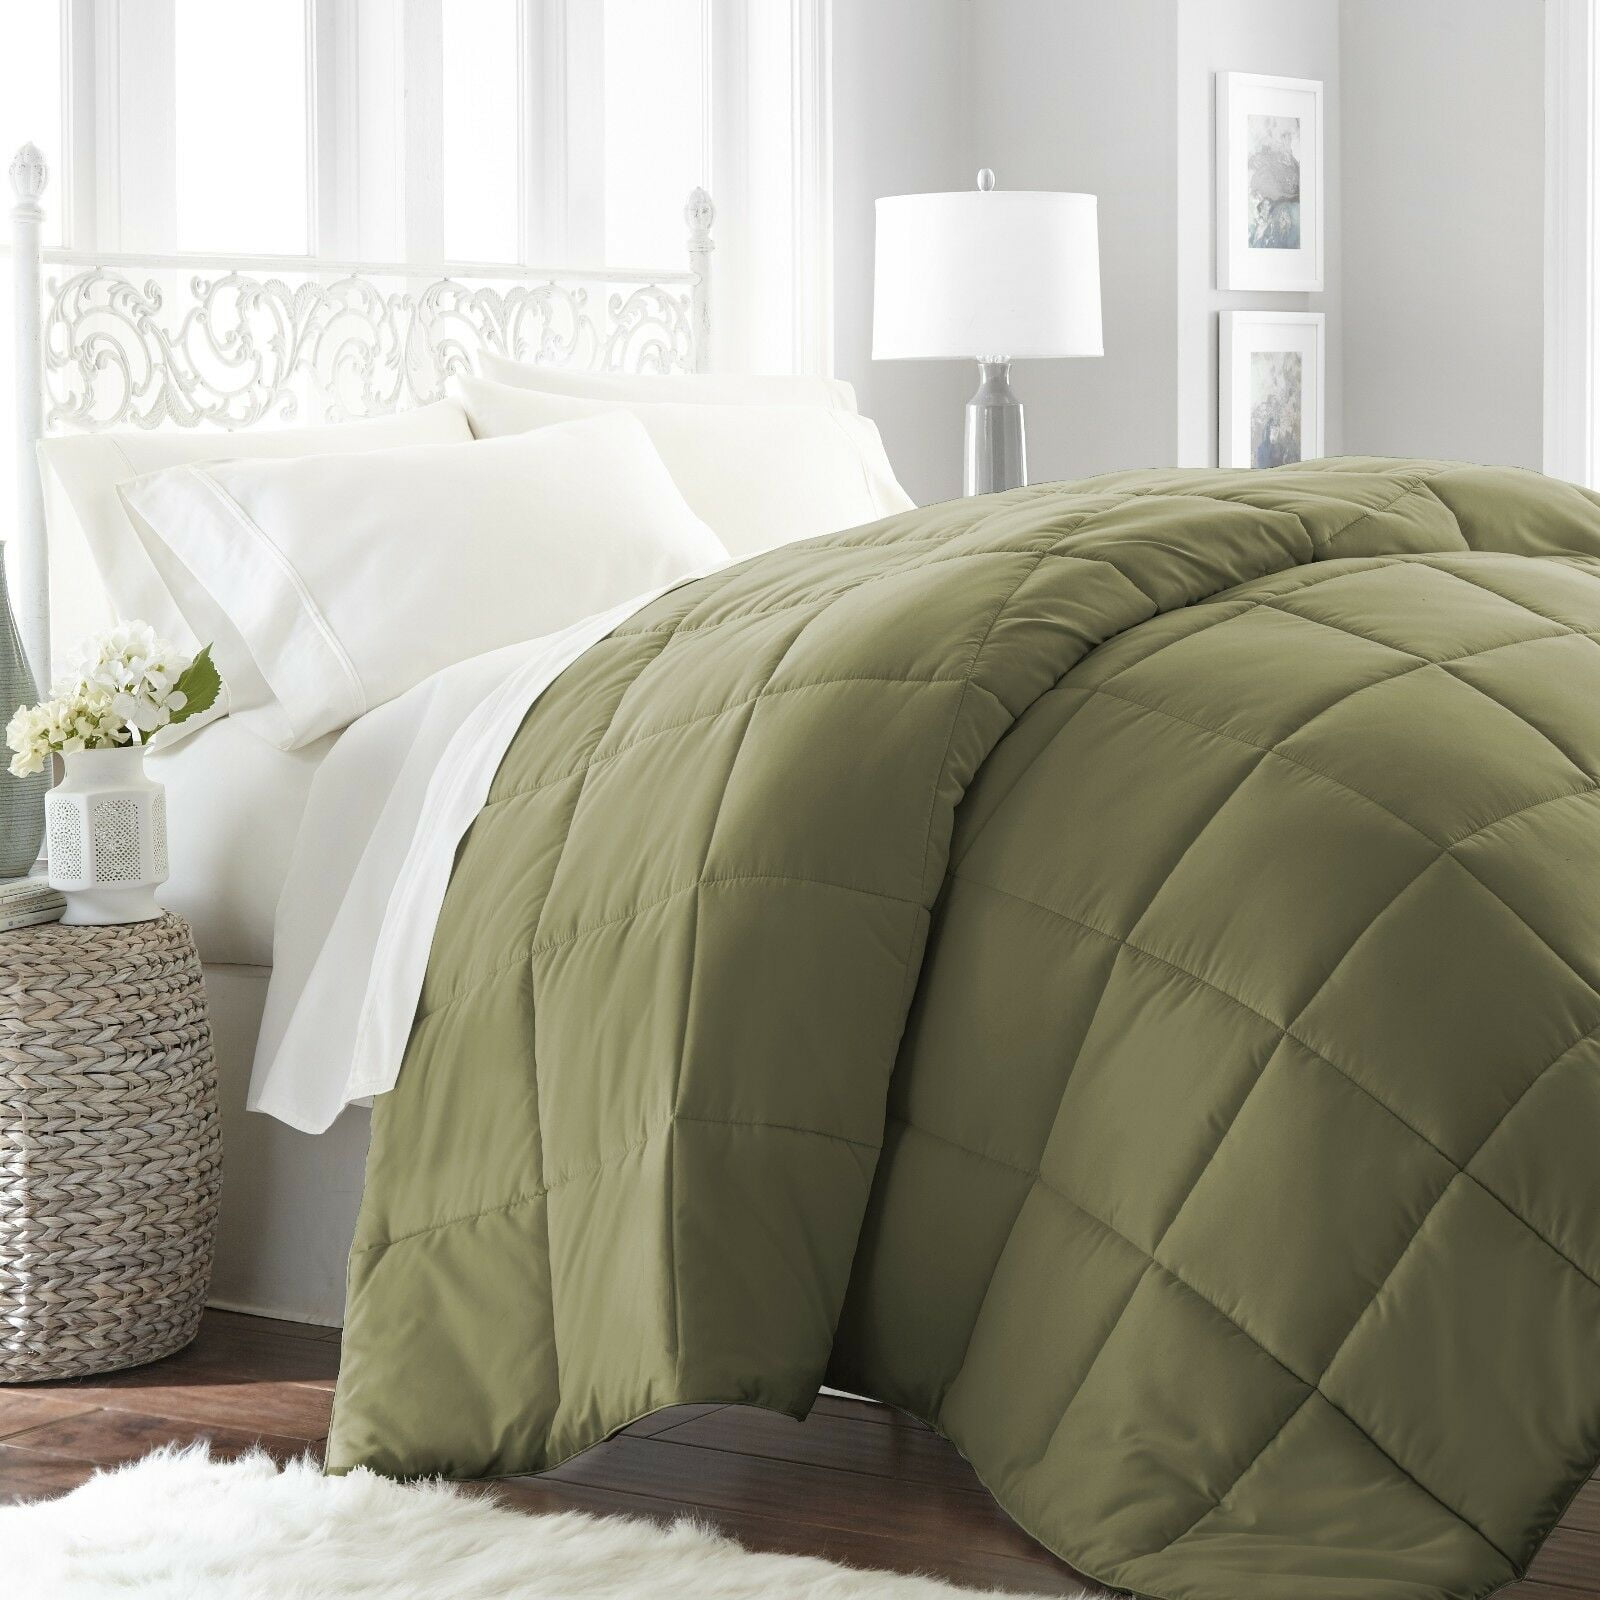 by Soft Essentials Six Colors! Hotel Quality Down Alternative Comforter 